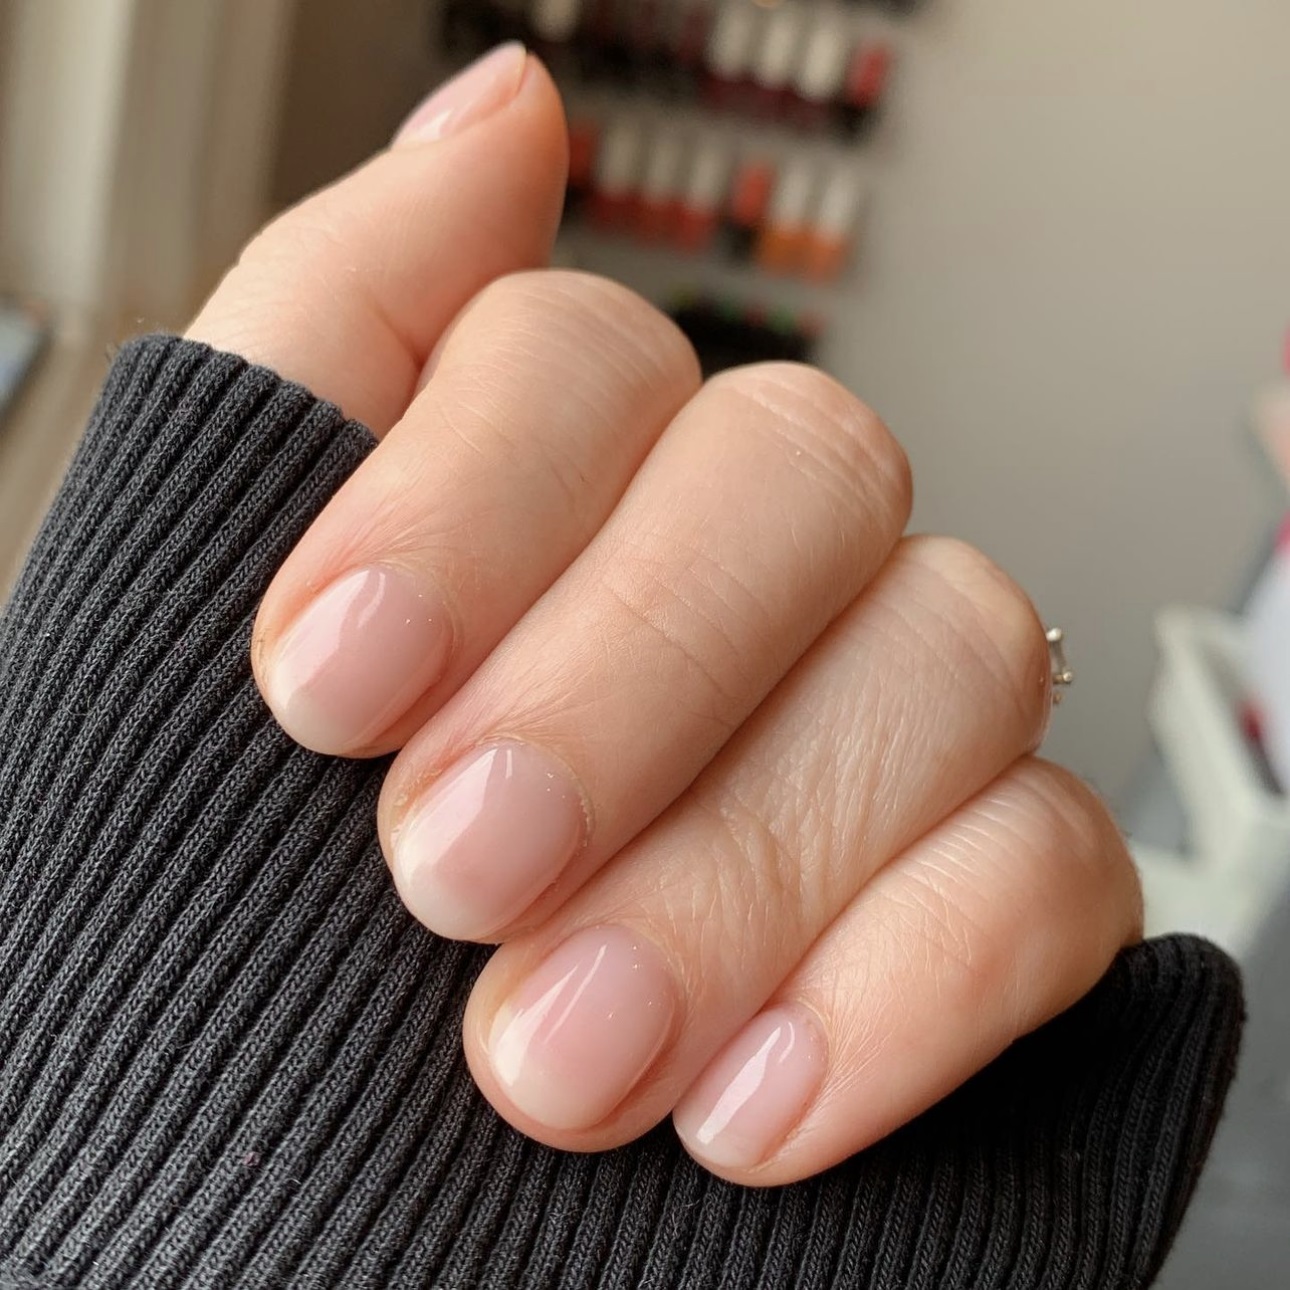 OPI GELCOLOR 照燈甲油-GCT69 Love is in the Bare 粉祼色